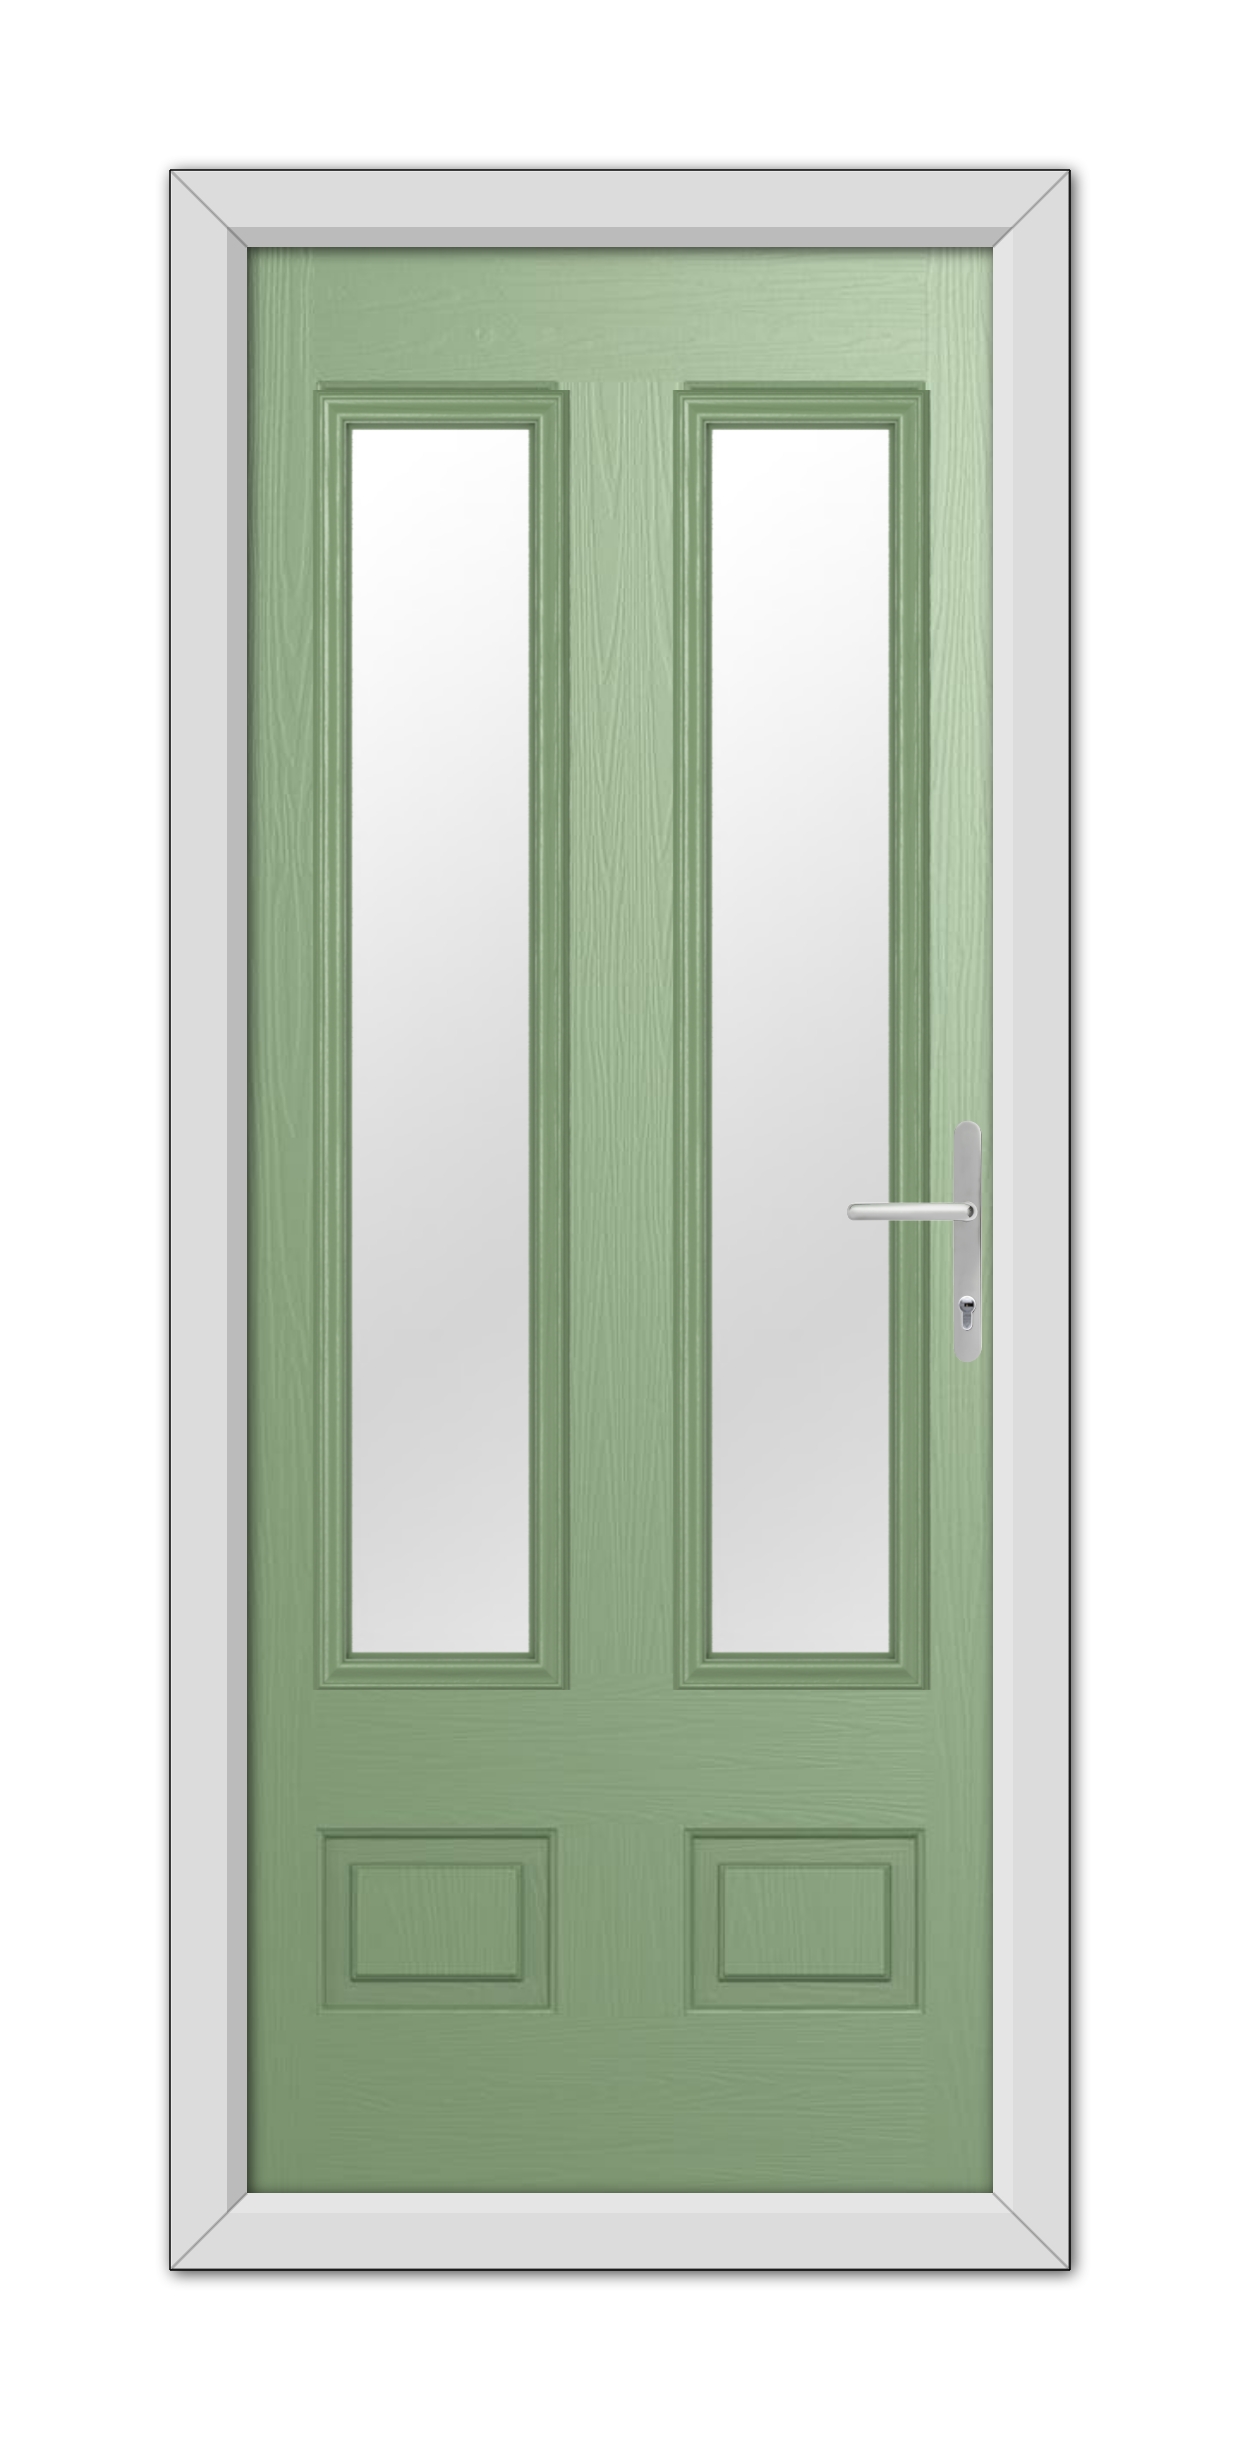 A Chartwell Green Aston Glazed 2 Composite Door 48mm Timber Core with rectangular glass panels and a silver handle, set within a white frame.